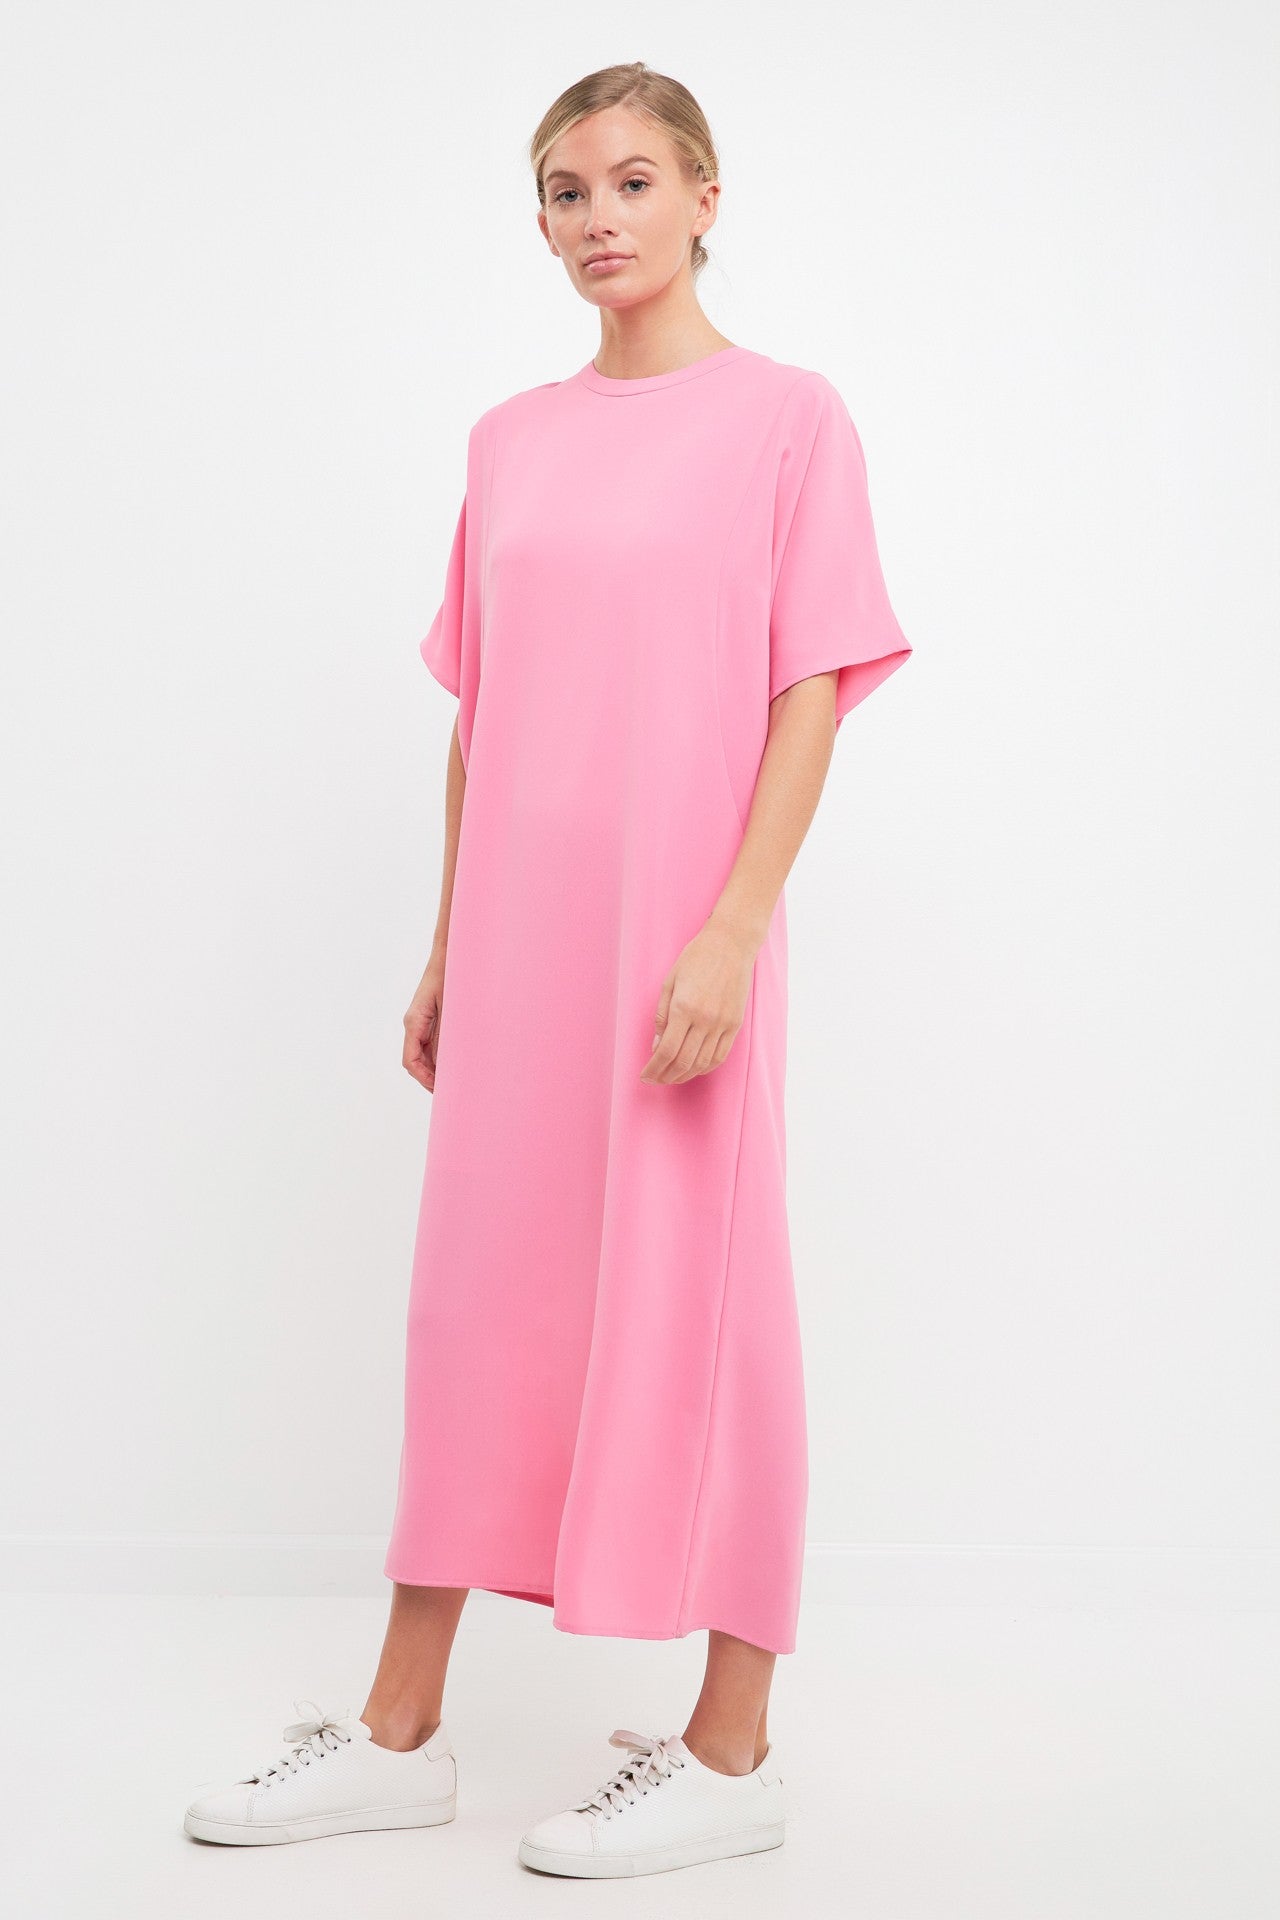 AUGUST APPAREL EVERYDAY MAXI